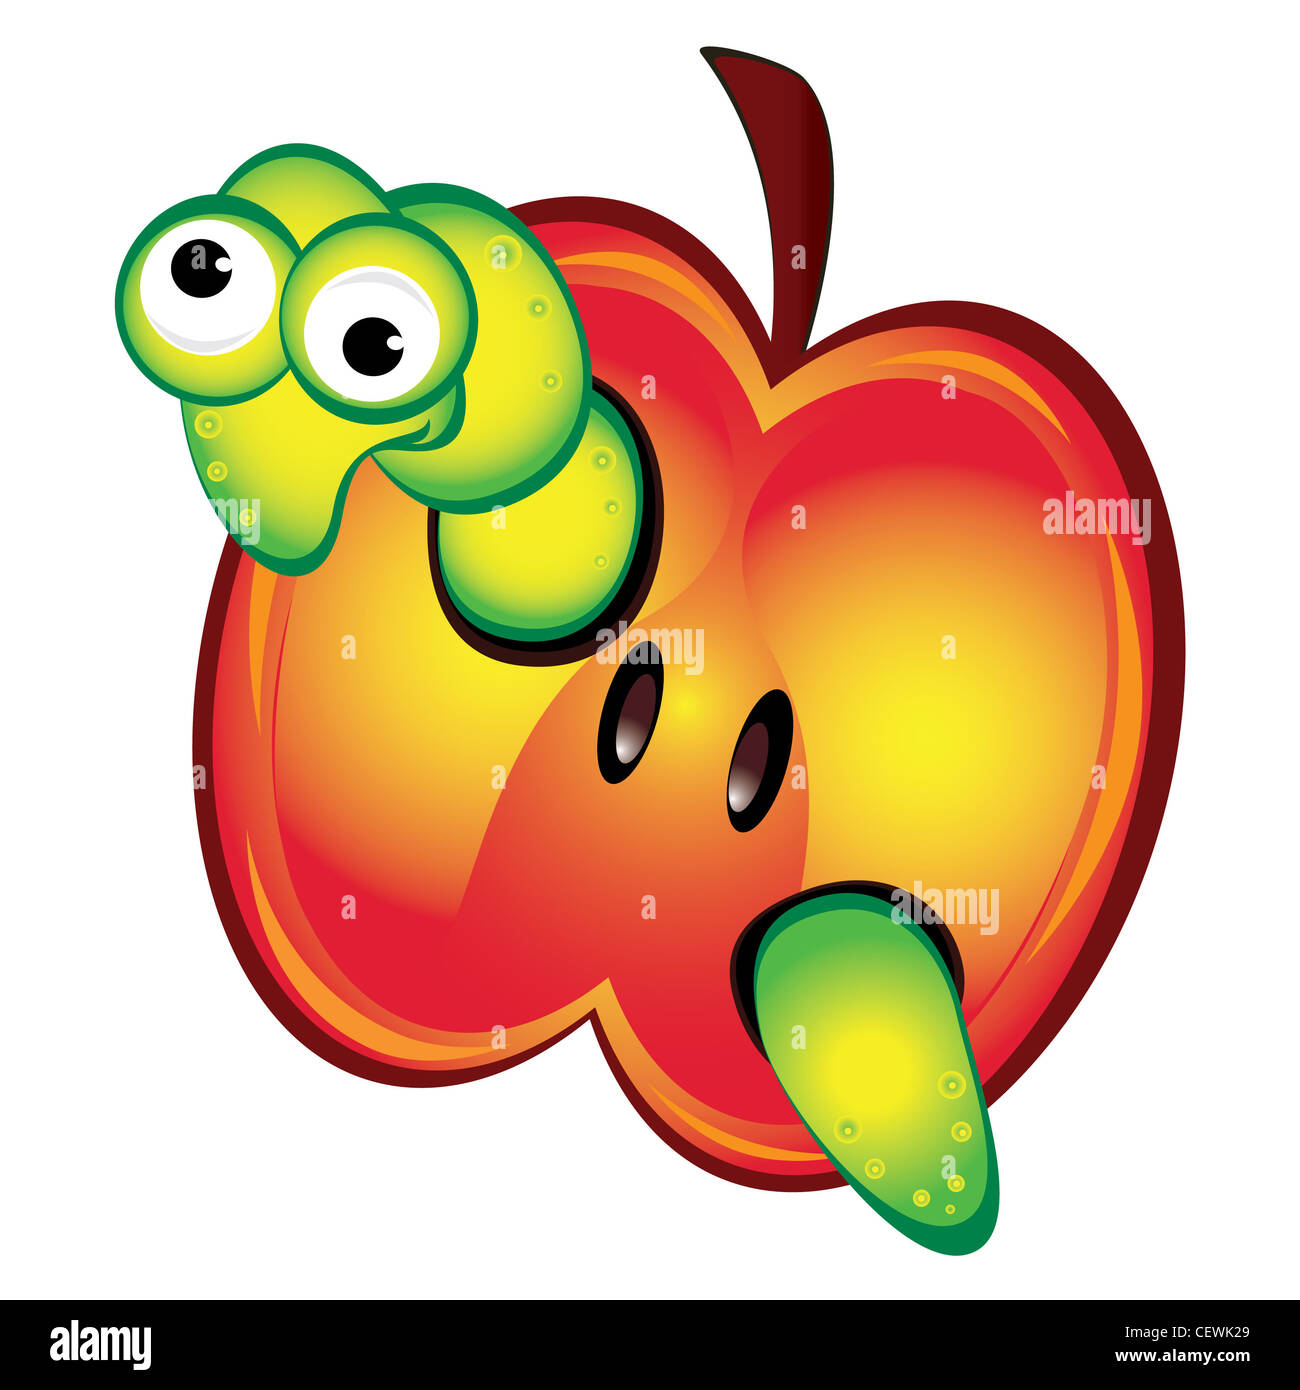 Cartoon illustration of a worm peeking out of an apple Stock Photo